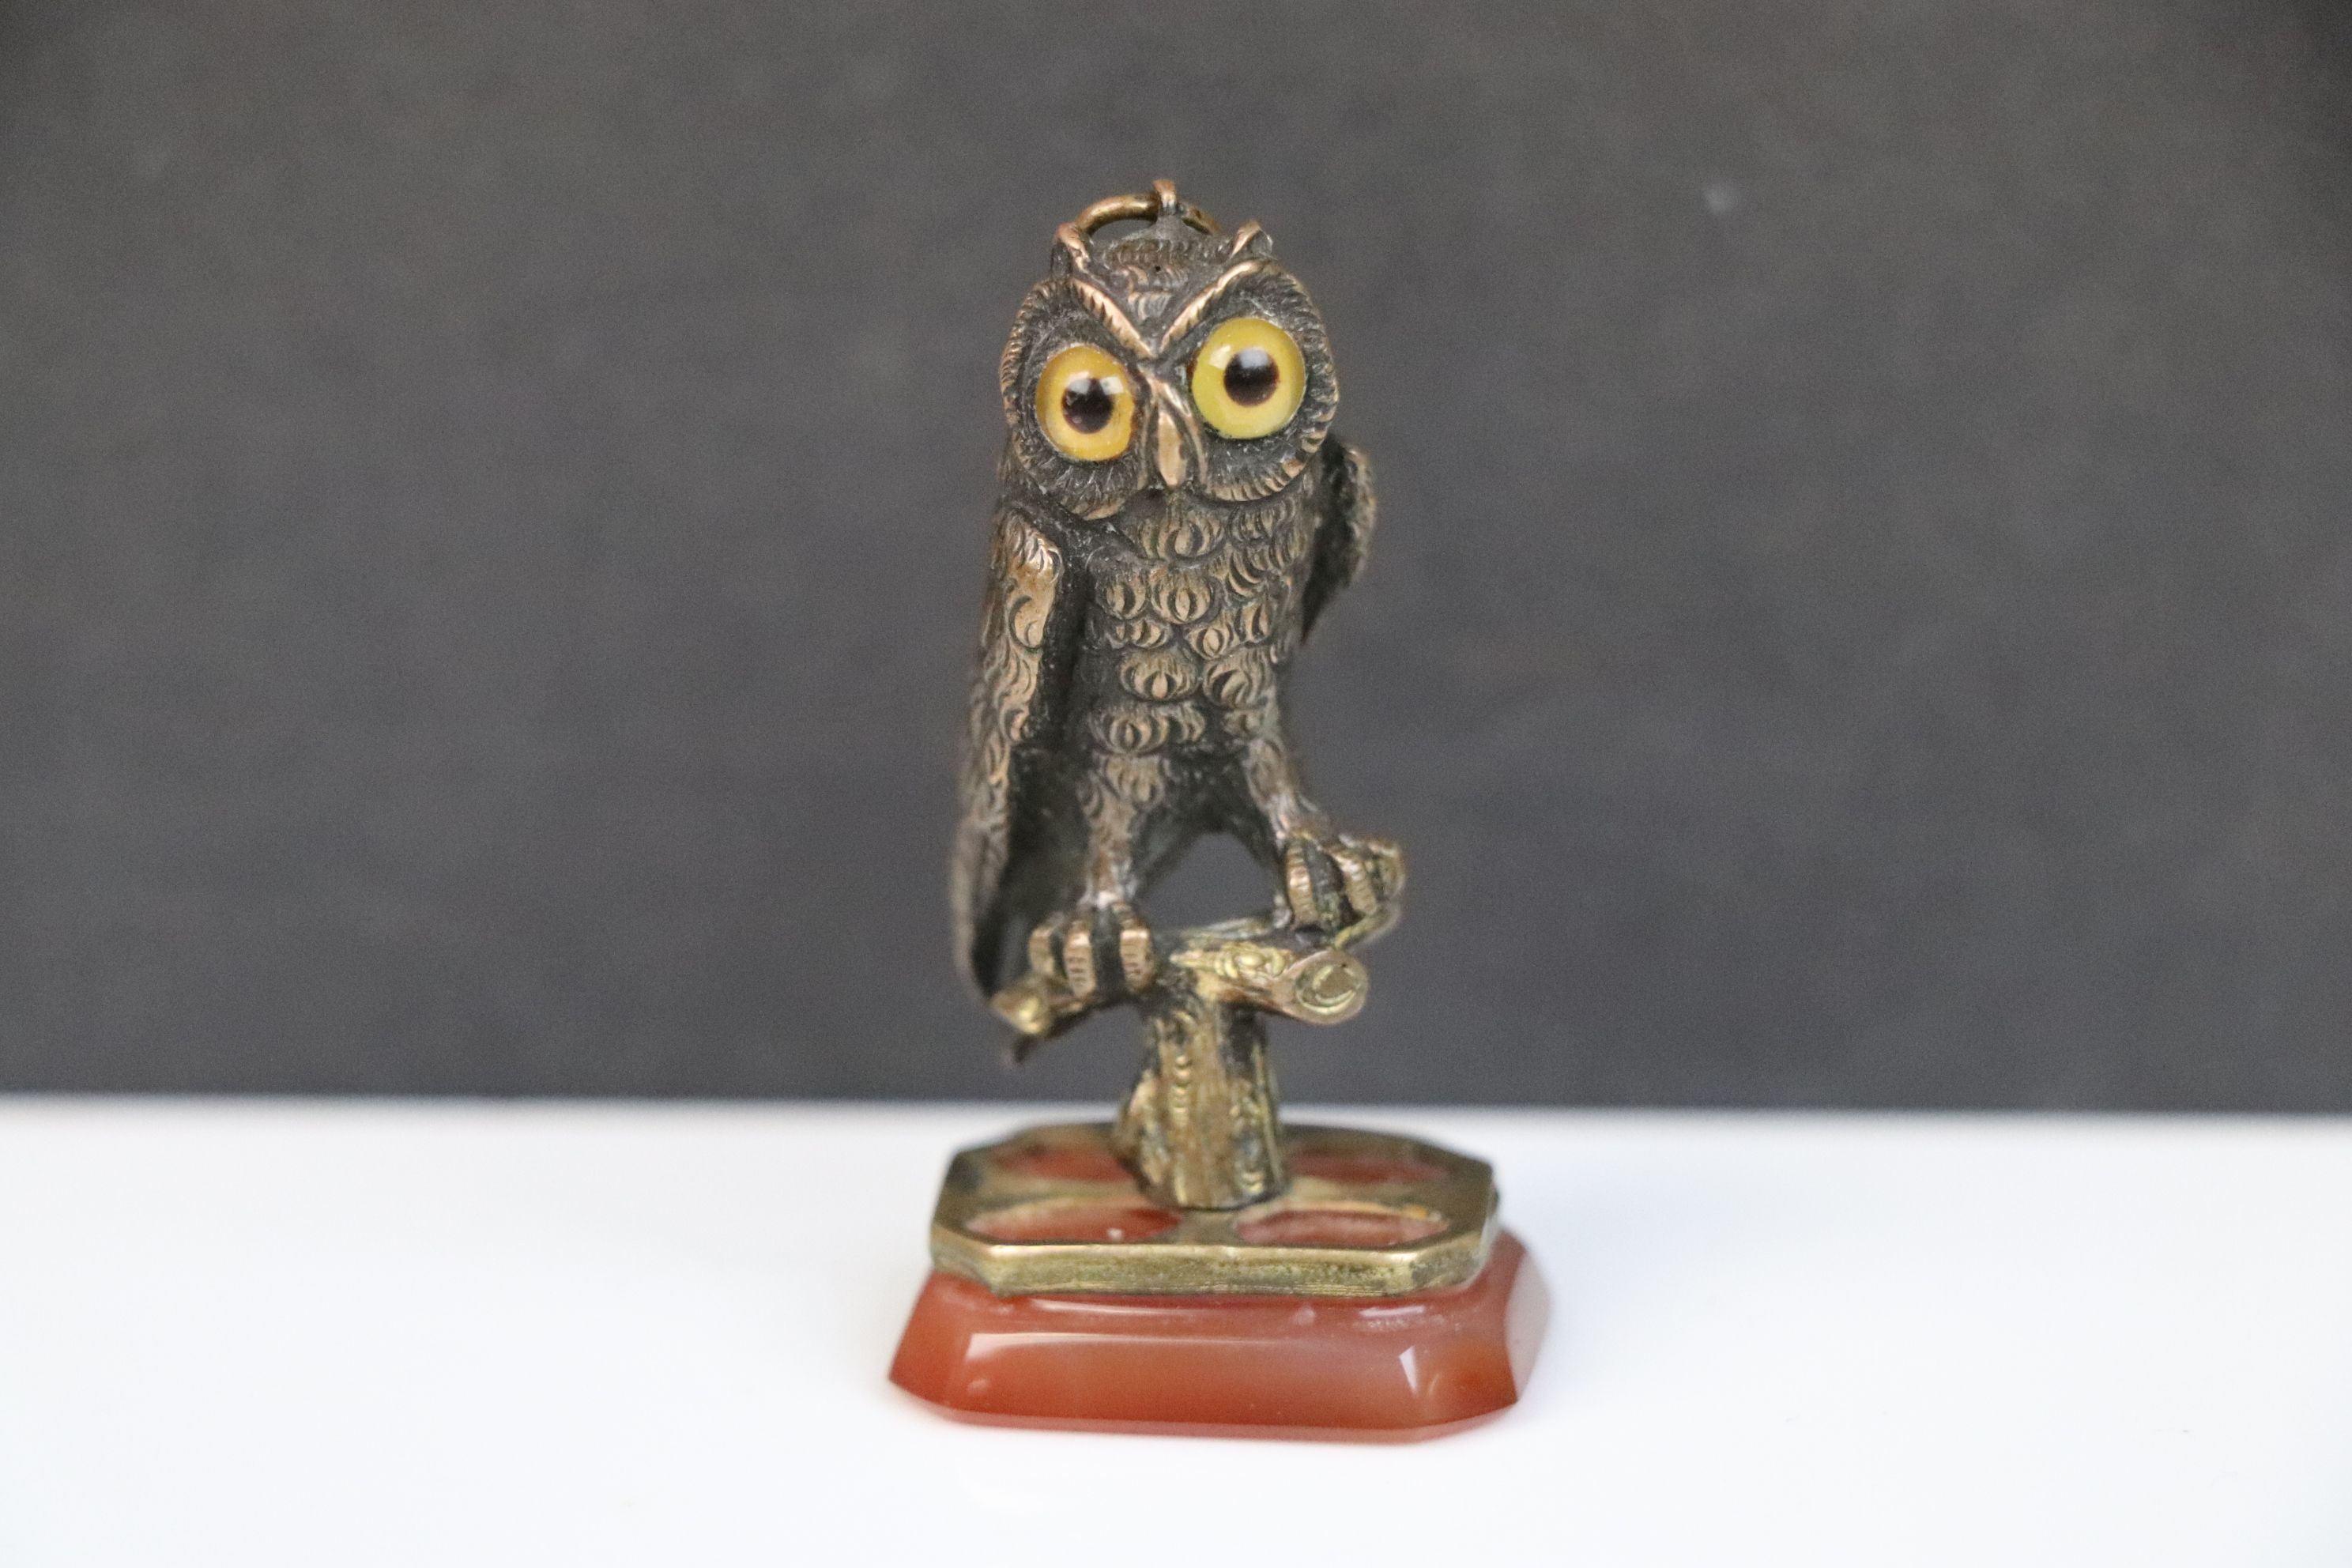 Antique fob seal in the form of an owl with glass eyes